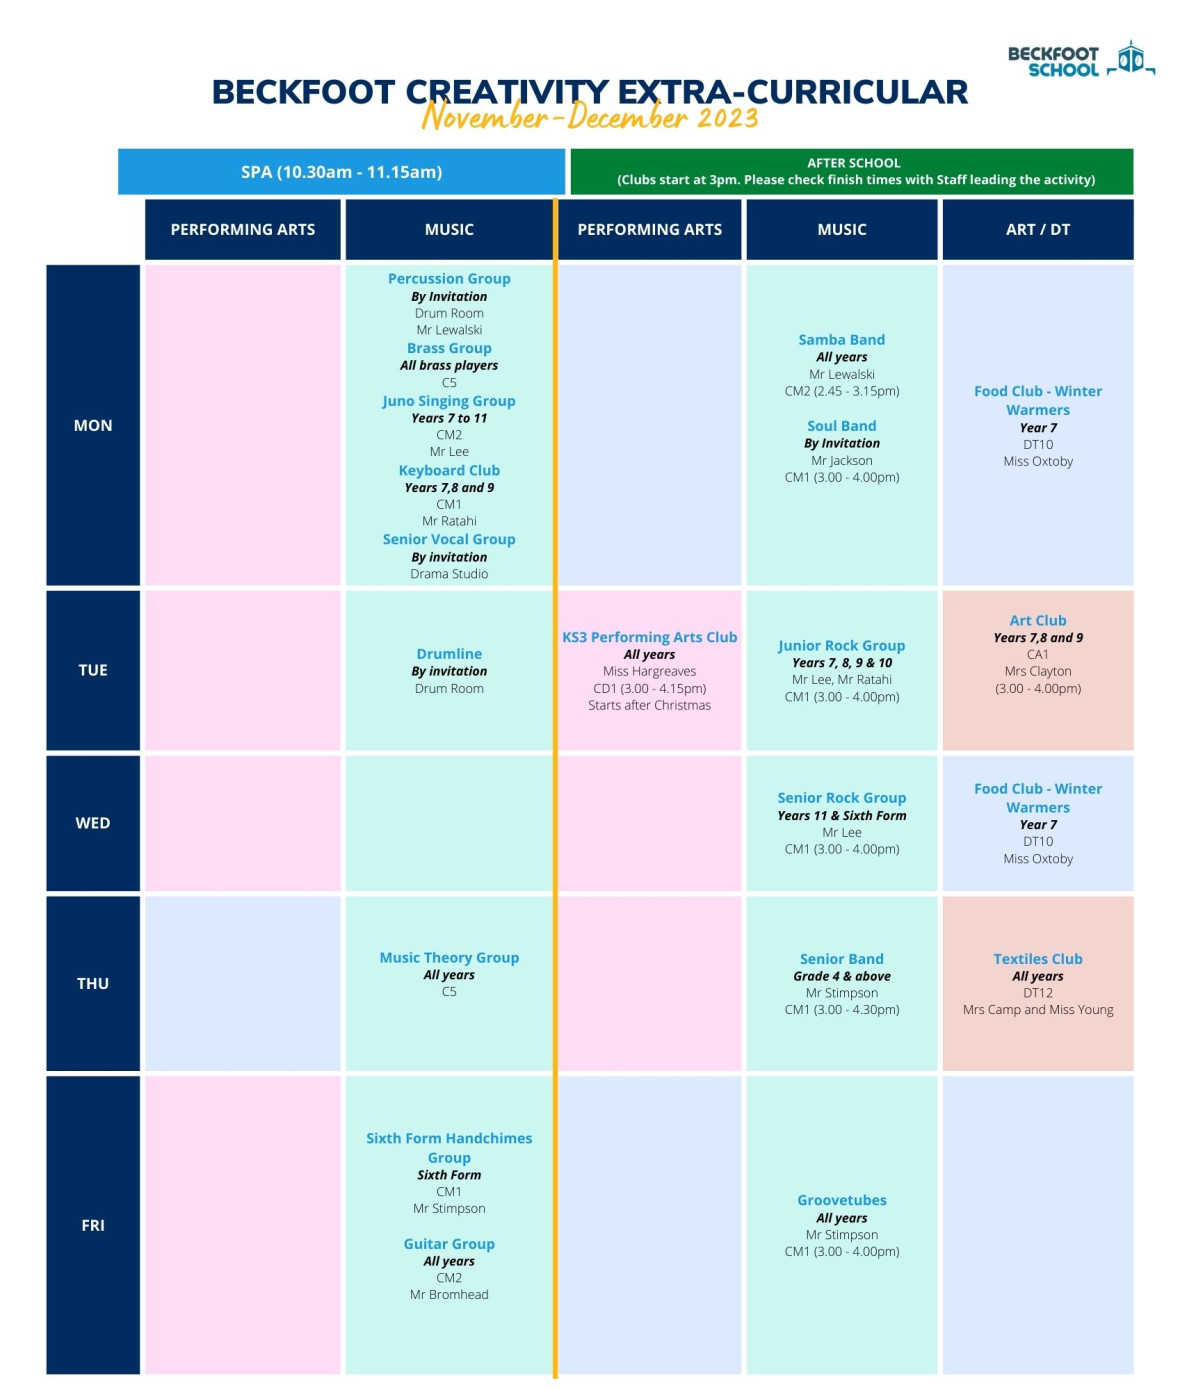 Extra Curricular Activity Creativity Timetable - Winter Schedule (1)